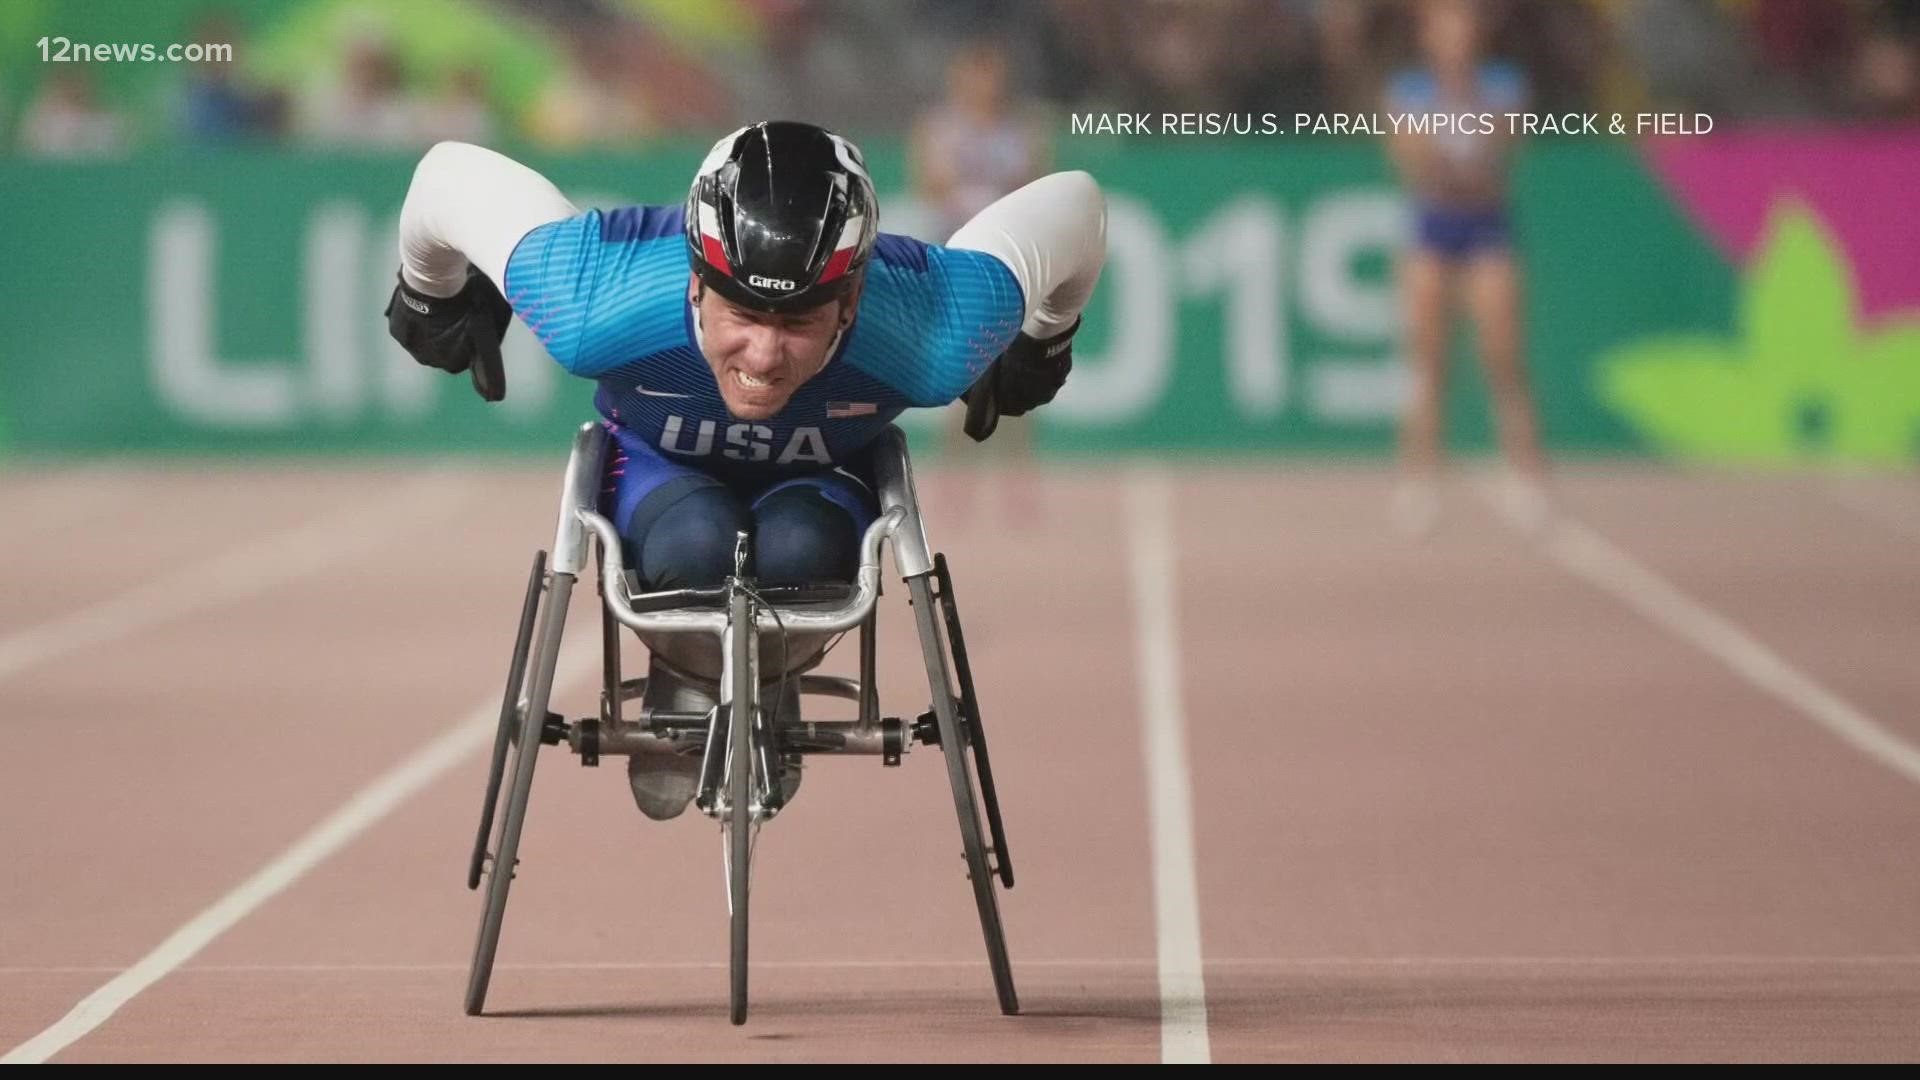 Erik Hightower is an Arizona native and is headed to Tokyo to compete in the Paralympics. Jen Wahl chats with Hightower to learn more about his journey.